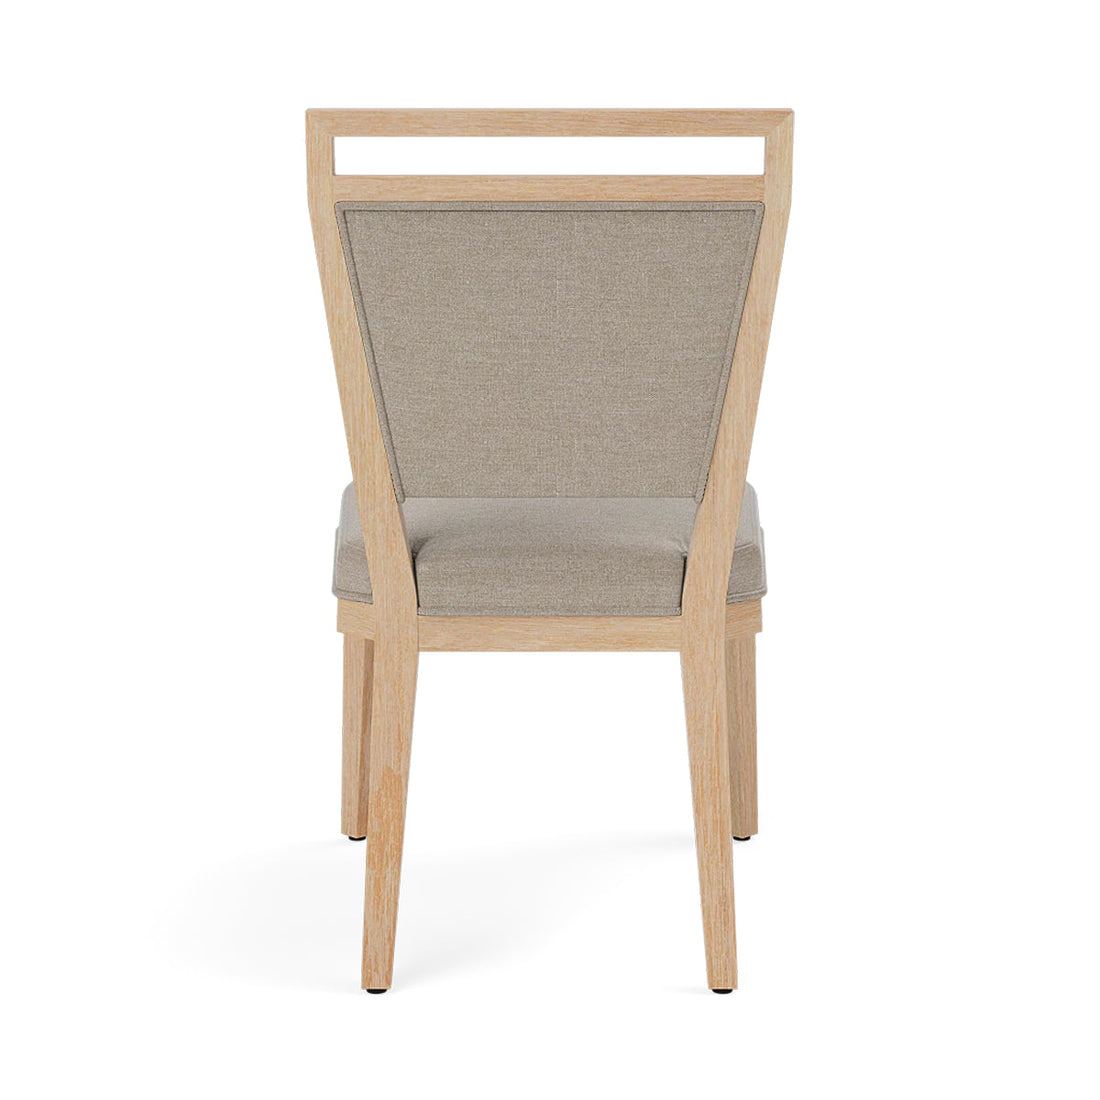 Made Goods Patrick Dining Chair in Arno Fabric